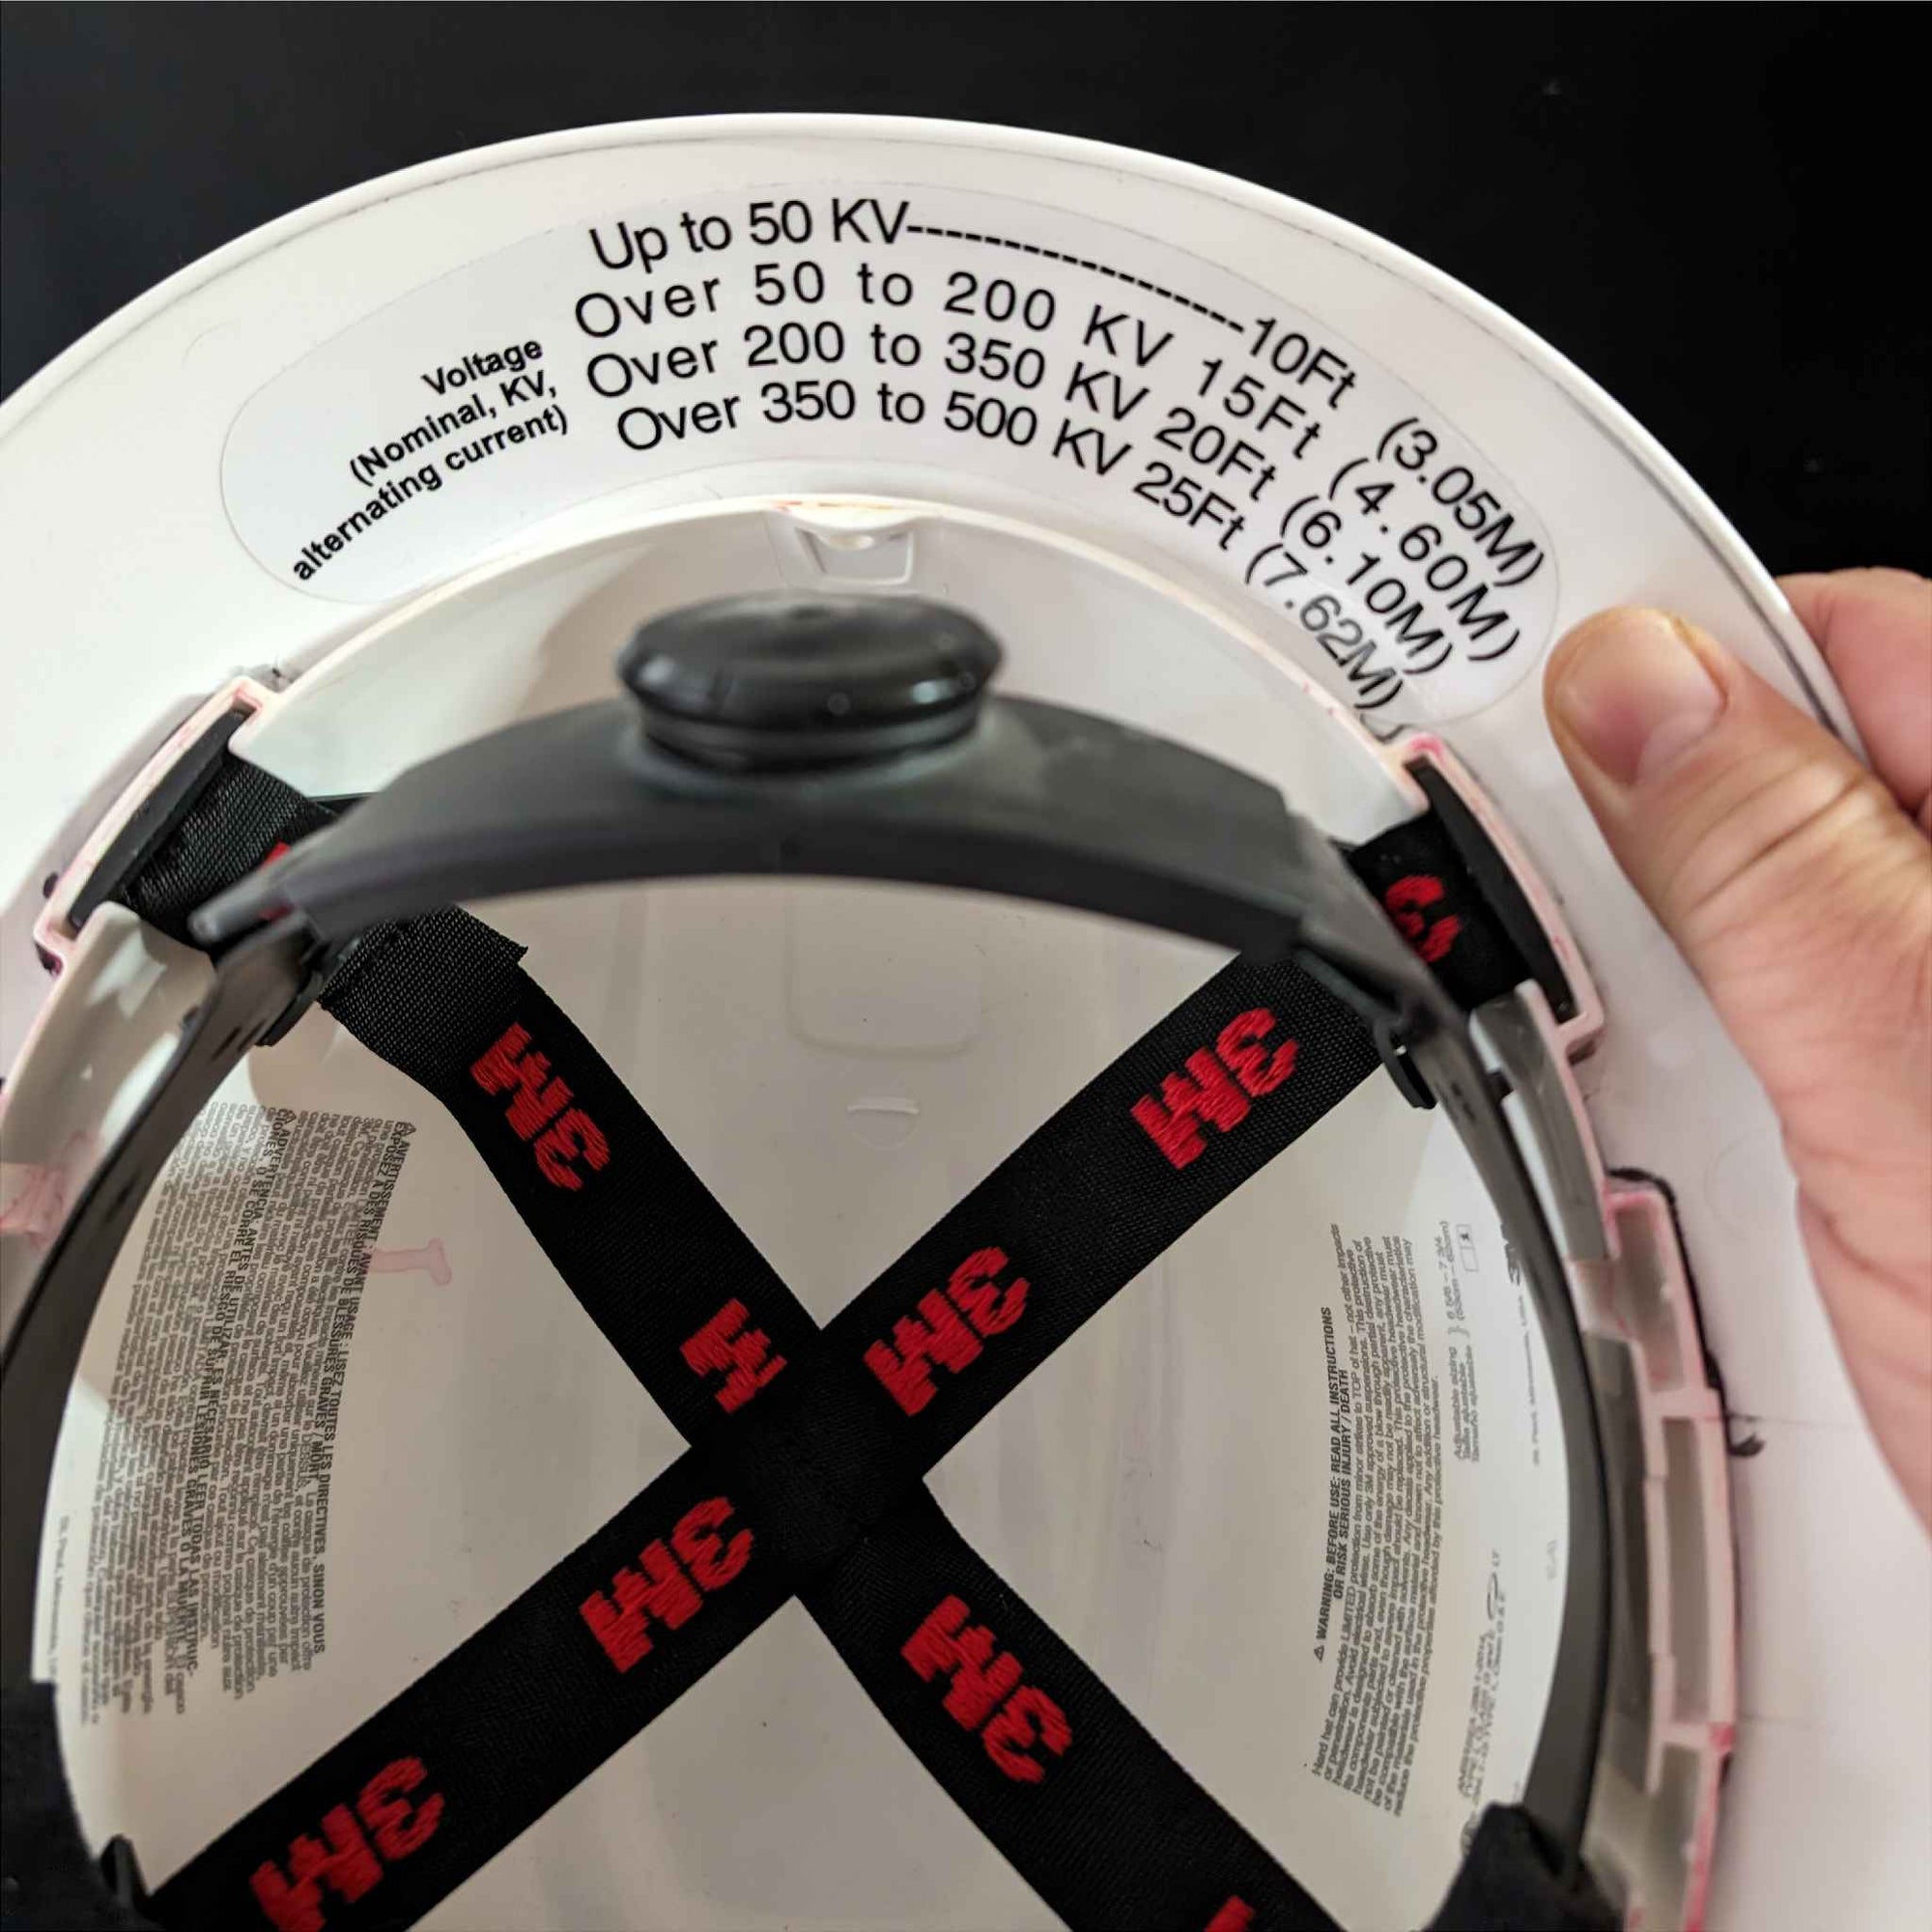 Power line clearance requirement chart printed on our under the brim hard hat decal. 